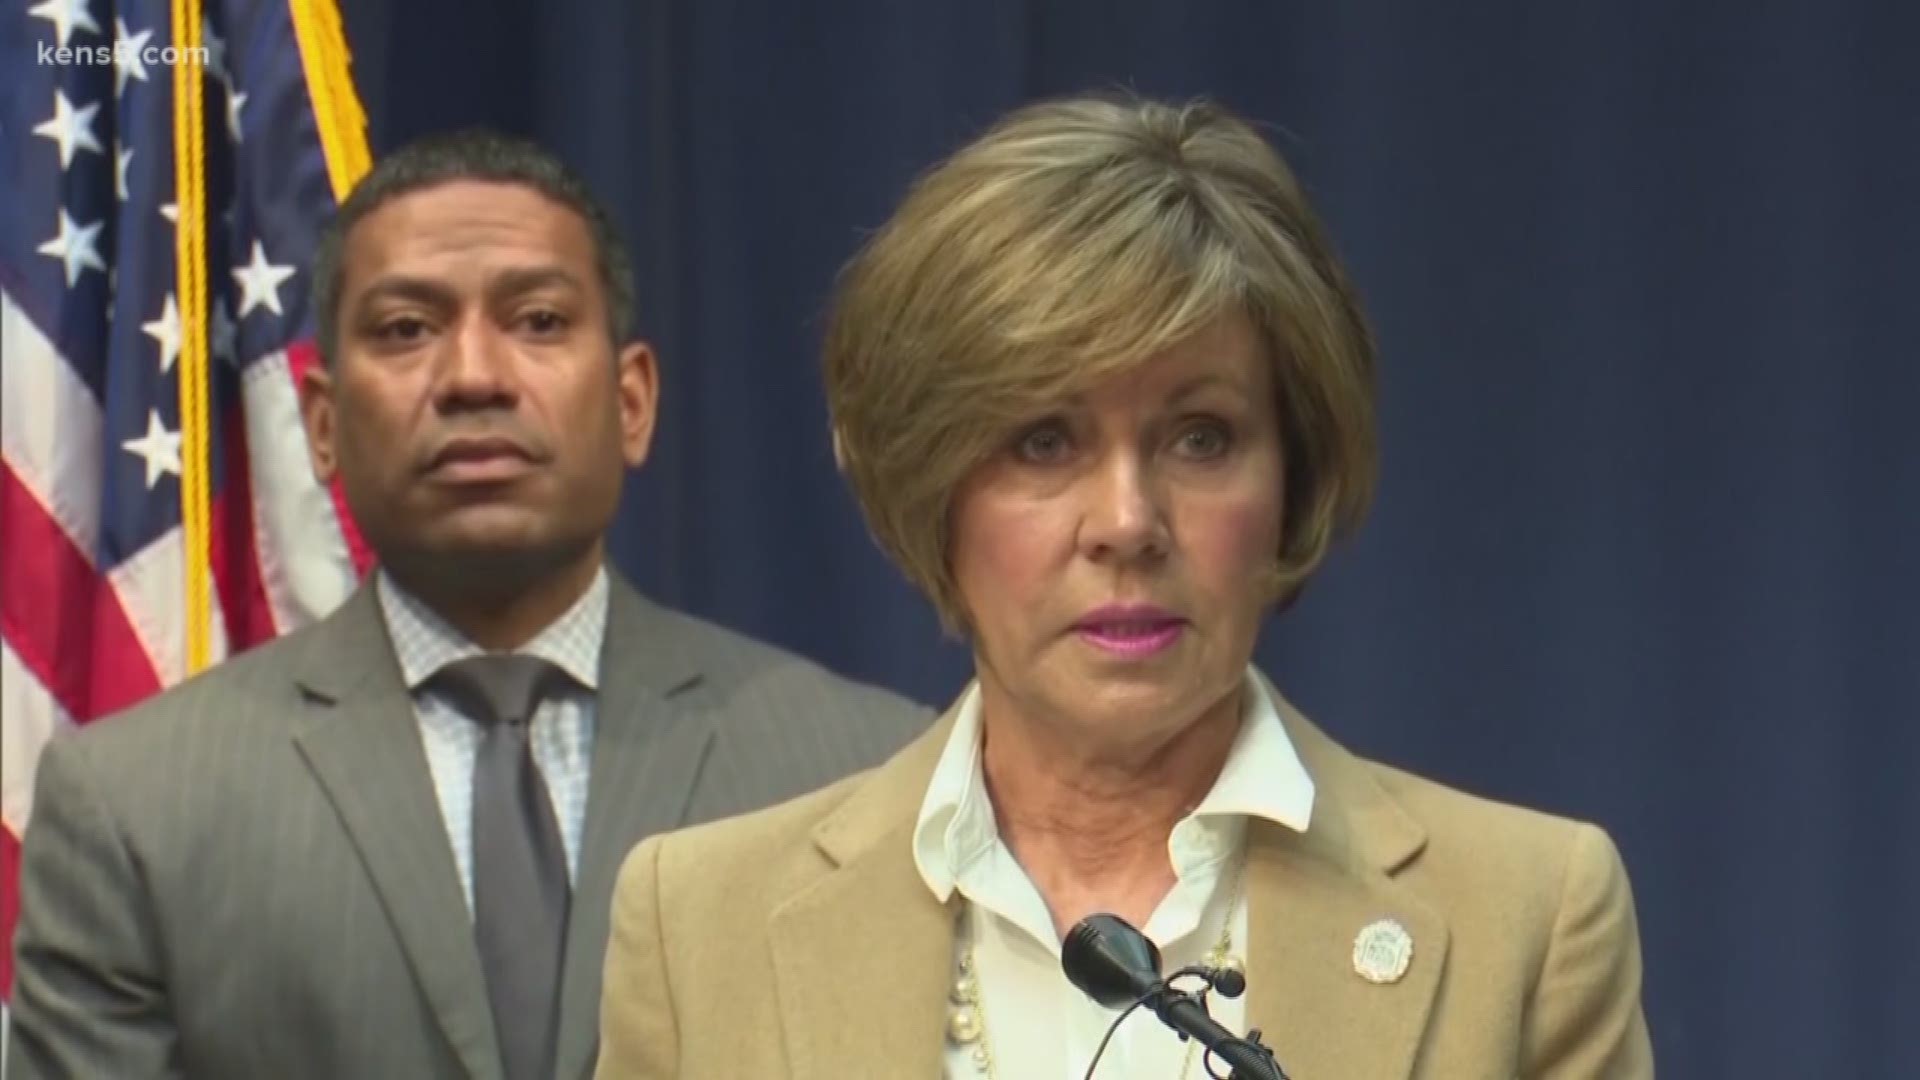 The reactions have been diverse following Thursday morning's announcement by City Manager Sheryl Sculley that she plans to retire after 13 years in the position.